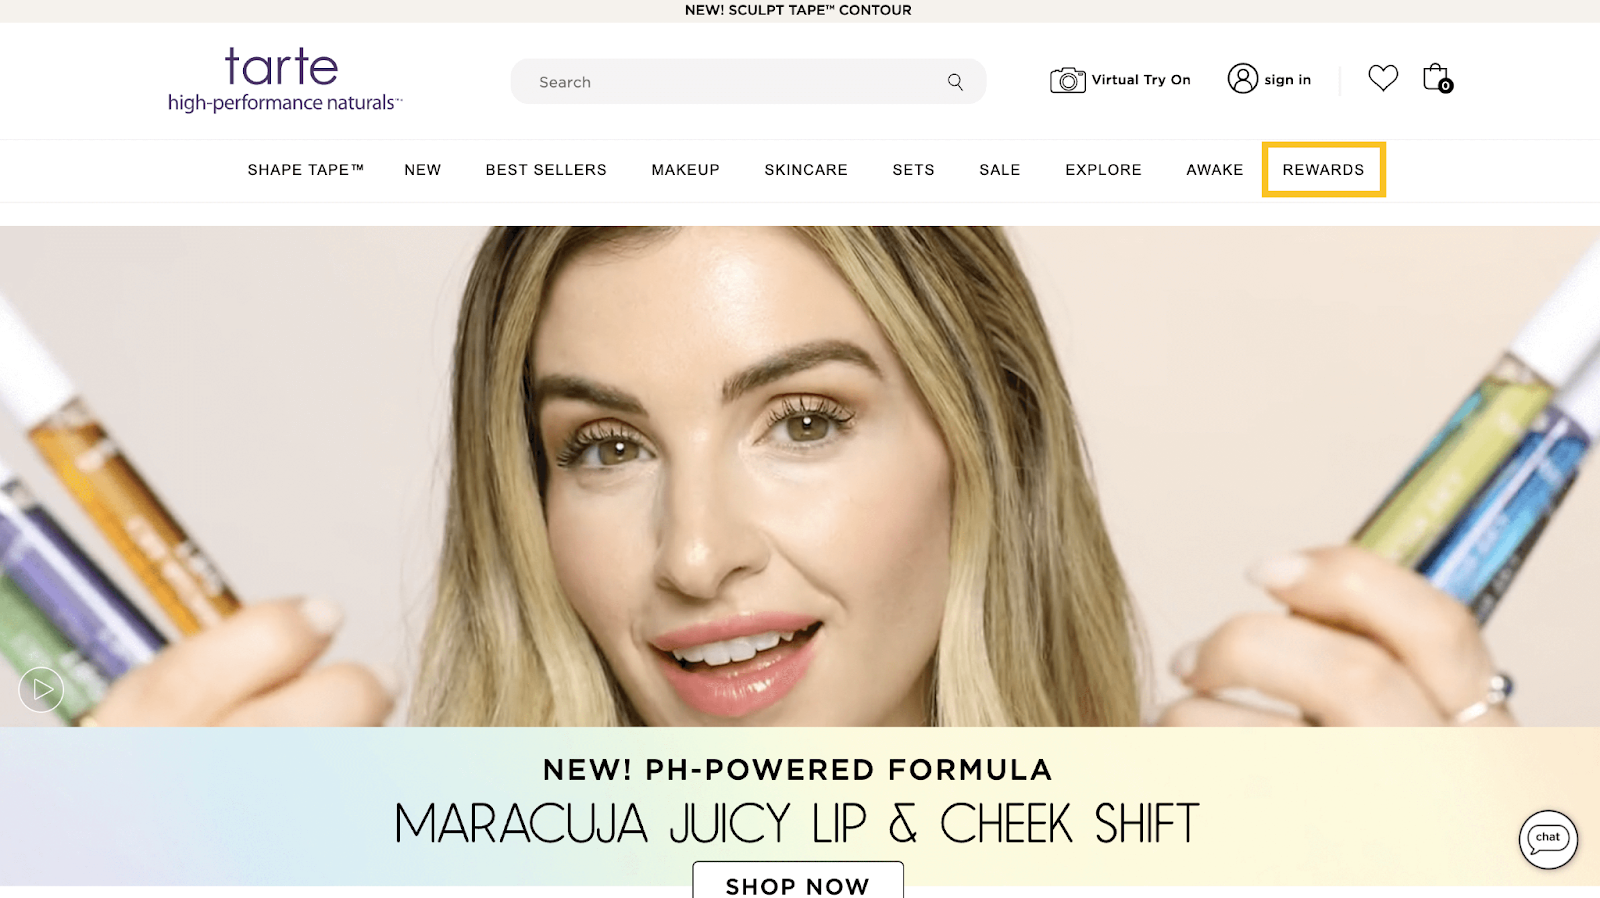 Rewards Case Study tarte perks–A screenshot of tarte’s homepage showing a blonde woman holding several of their Maracuja Juicy Lip and Cheek Shift products. The ‘Rewards’ section in their menu is outlined in a yellow box. 